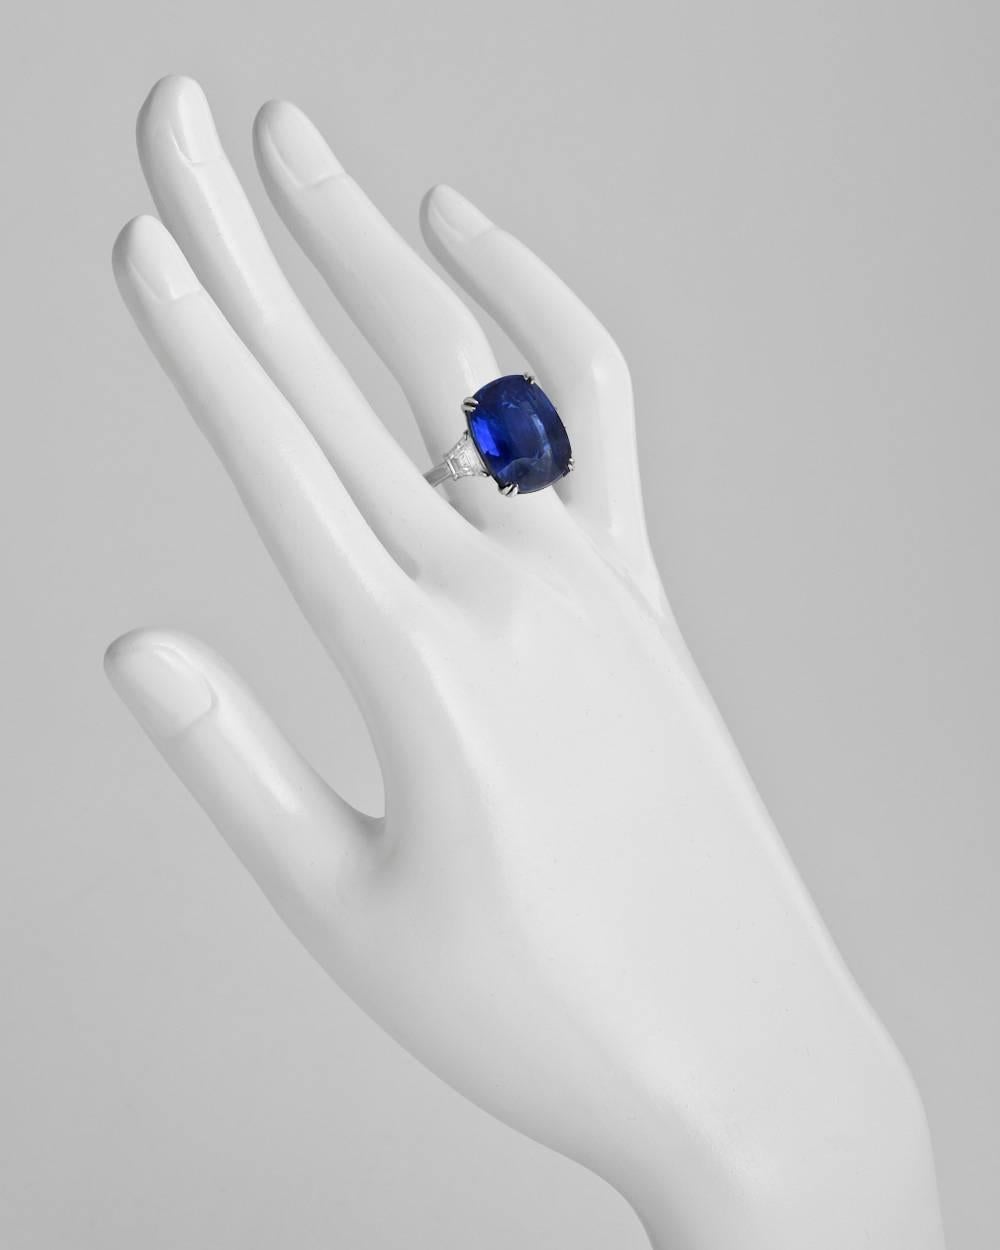 Ceylon sapphire and diamond ring, centering a natural, unheated cushion-shaped sapphire weighing 16.04 carats, flanked by a trapeze-cut diamond at either shoulder, the pair of diamonds weighing approximately 1.06 total carats, mounted in platinum.